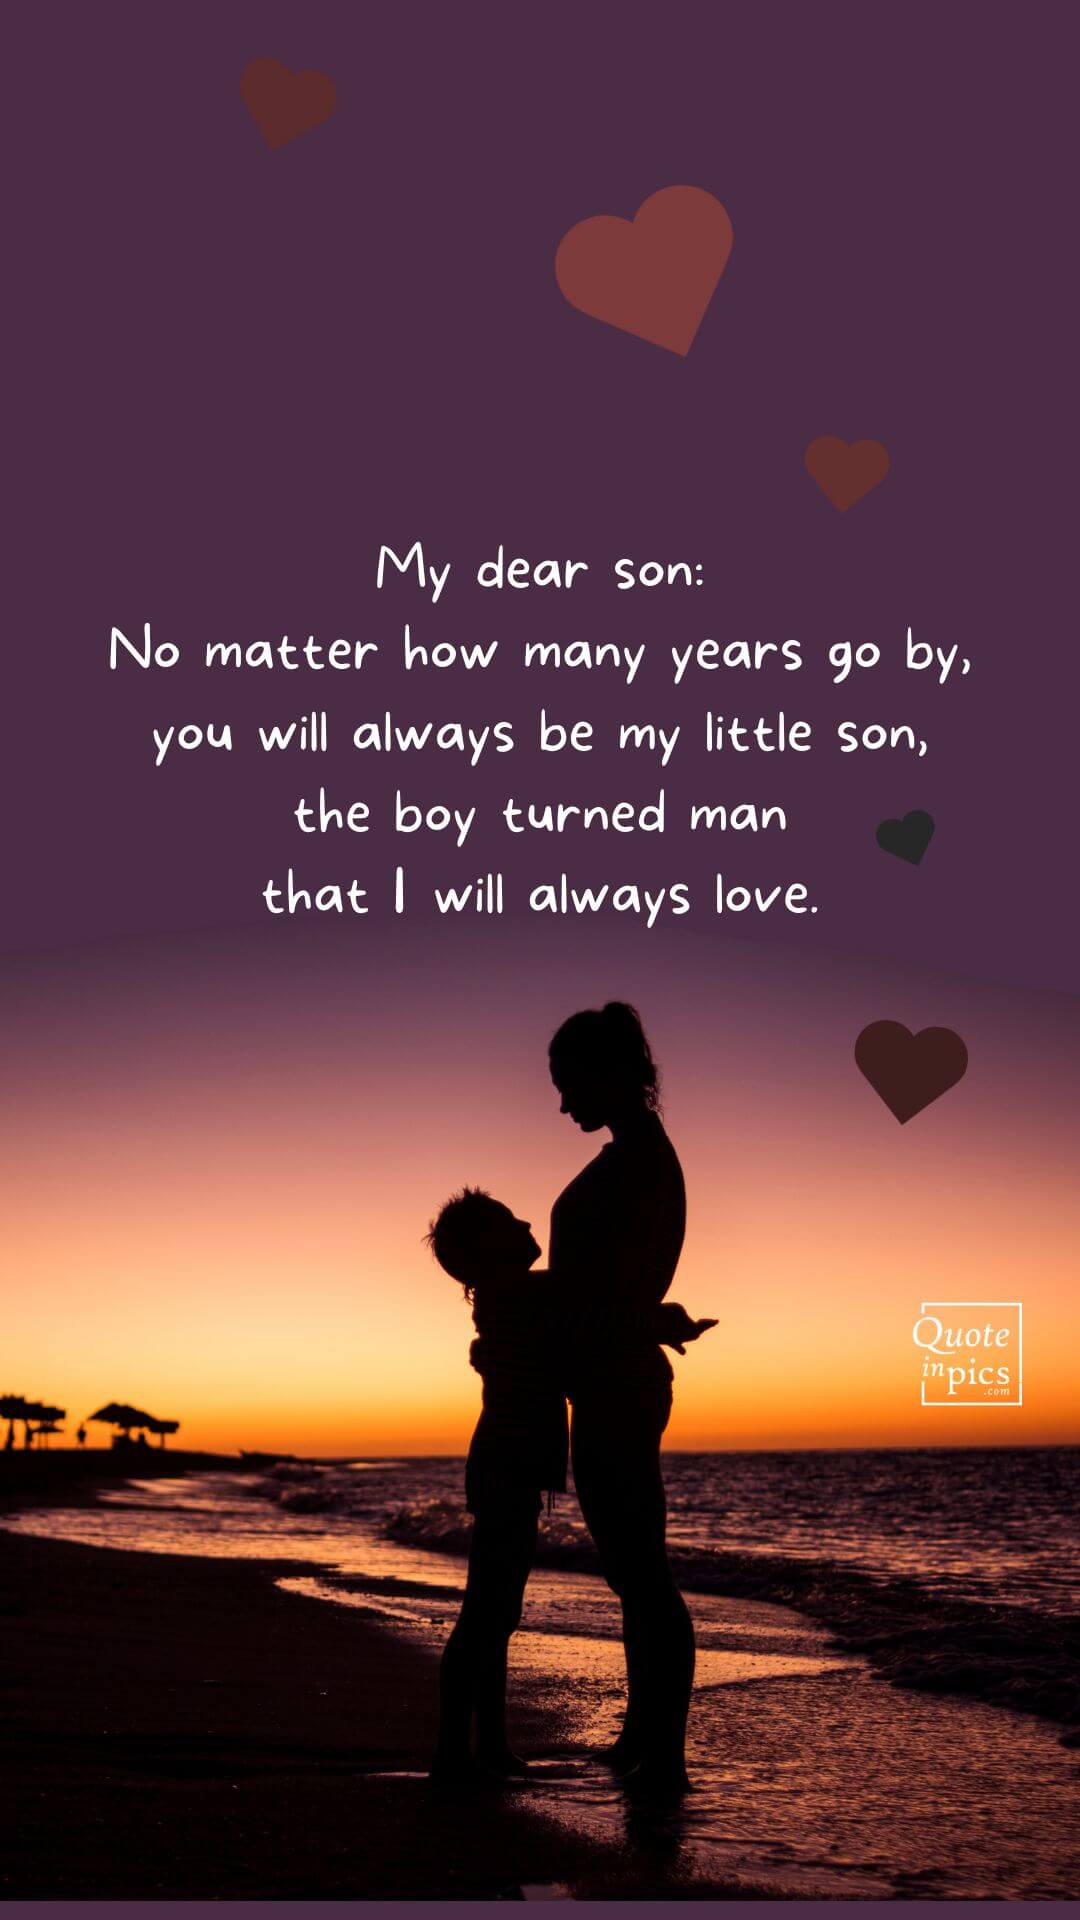 Image with message to dedicate to a beloved son